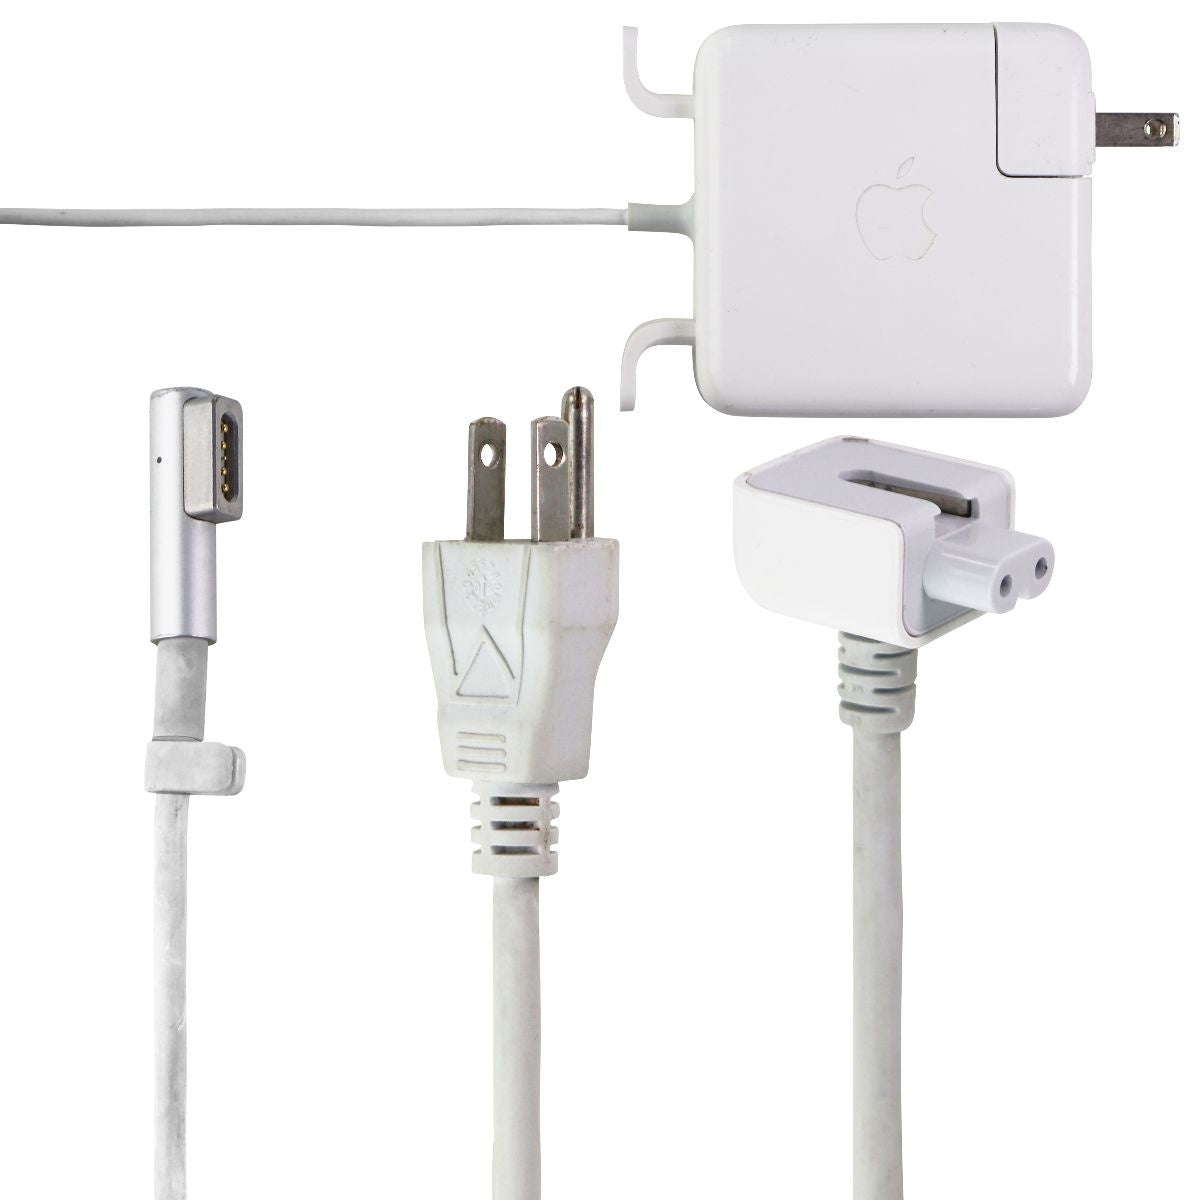 Apple 60W MagSafe Power Adapter w/ Wall Cable & Folding Plug - White (A1344) Computer Accessories - Laptop Power Adapters/Chargers Apple    - Simple Cell Bulk Wholesale Pricing - USA Seller